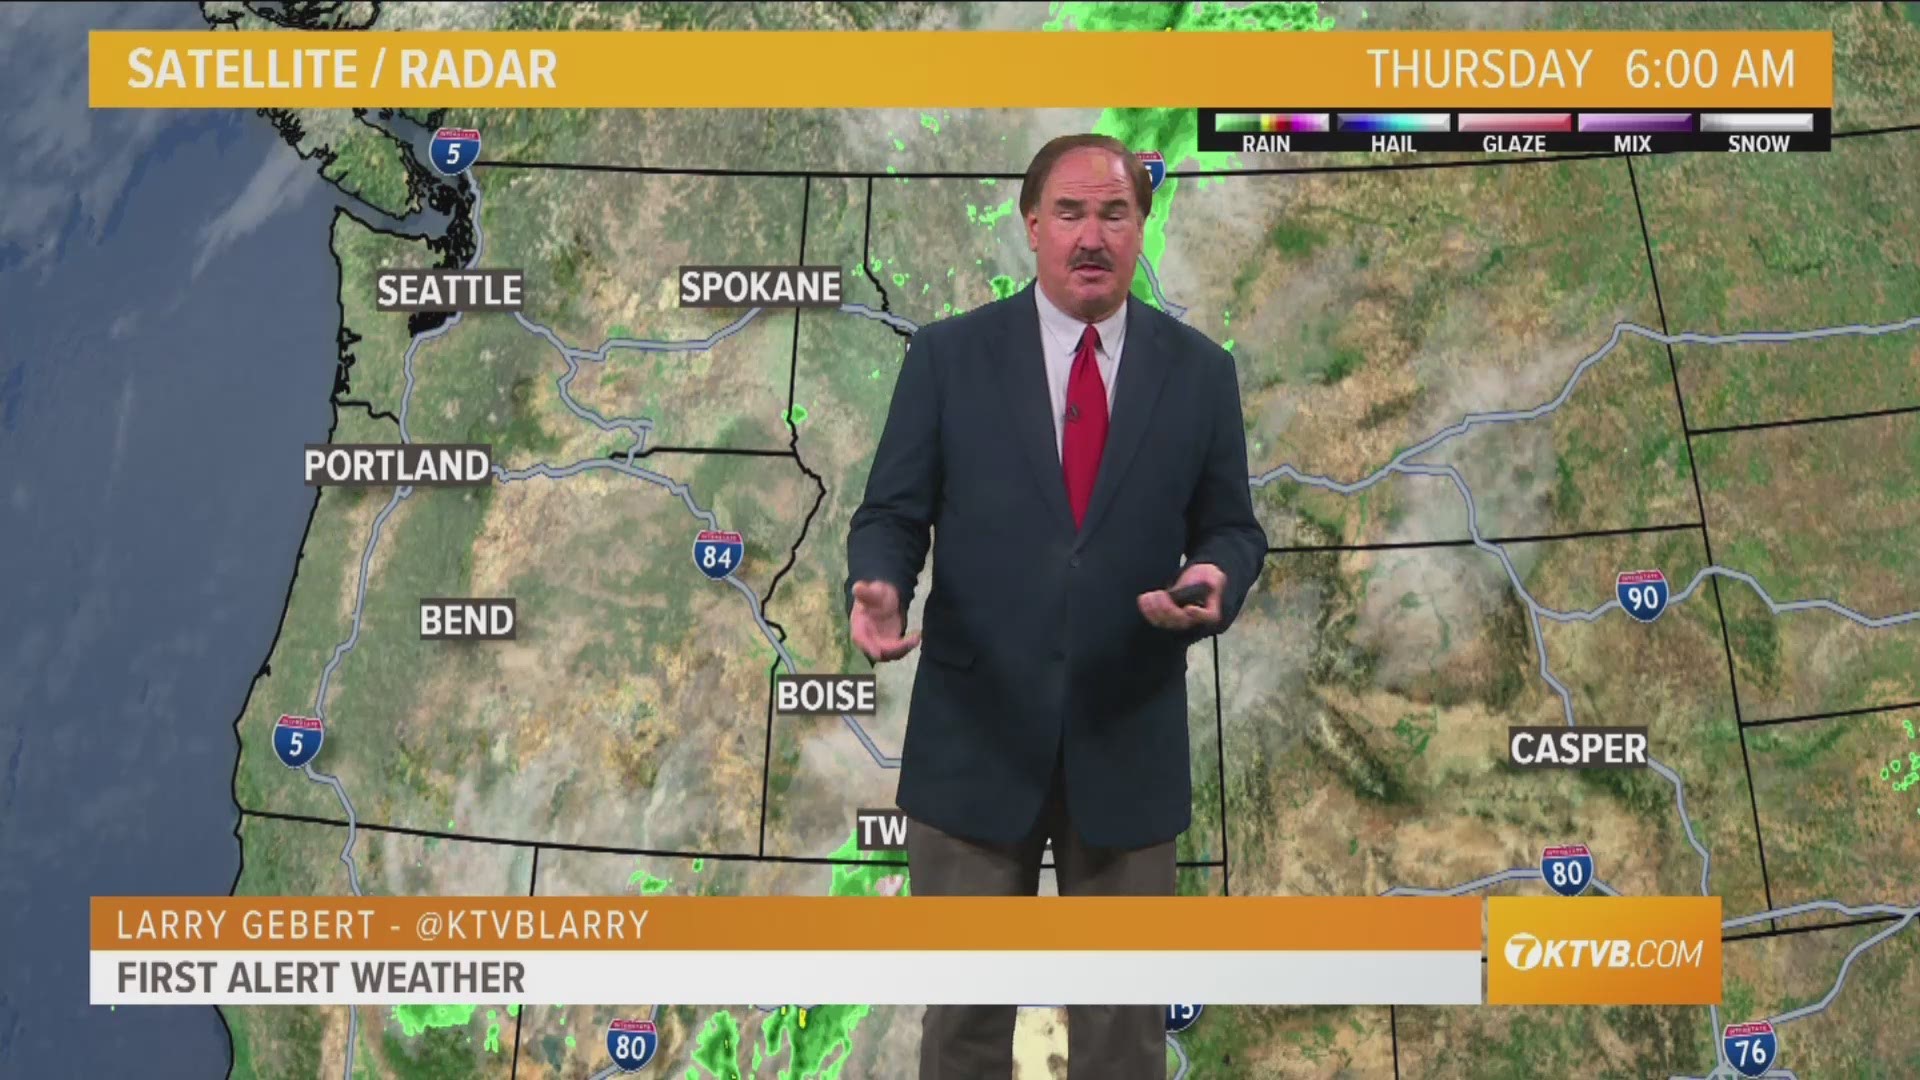 Larry Gebert says showers are moving through the area, temps will remain cool, below normal.